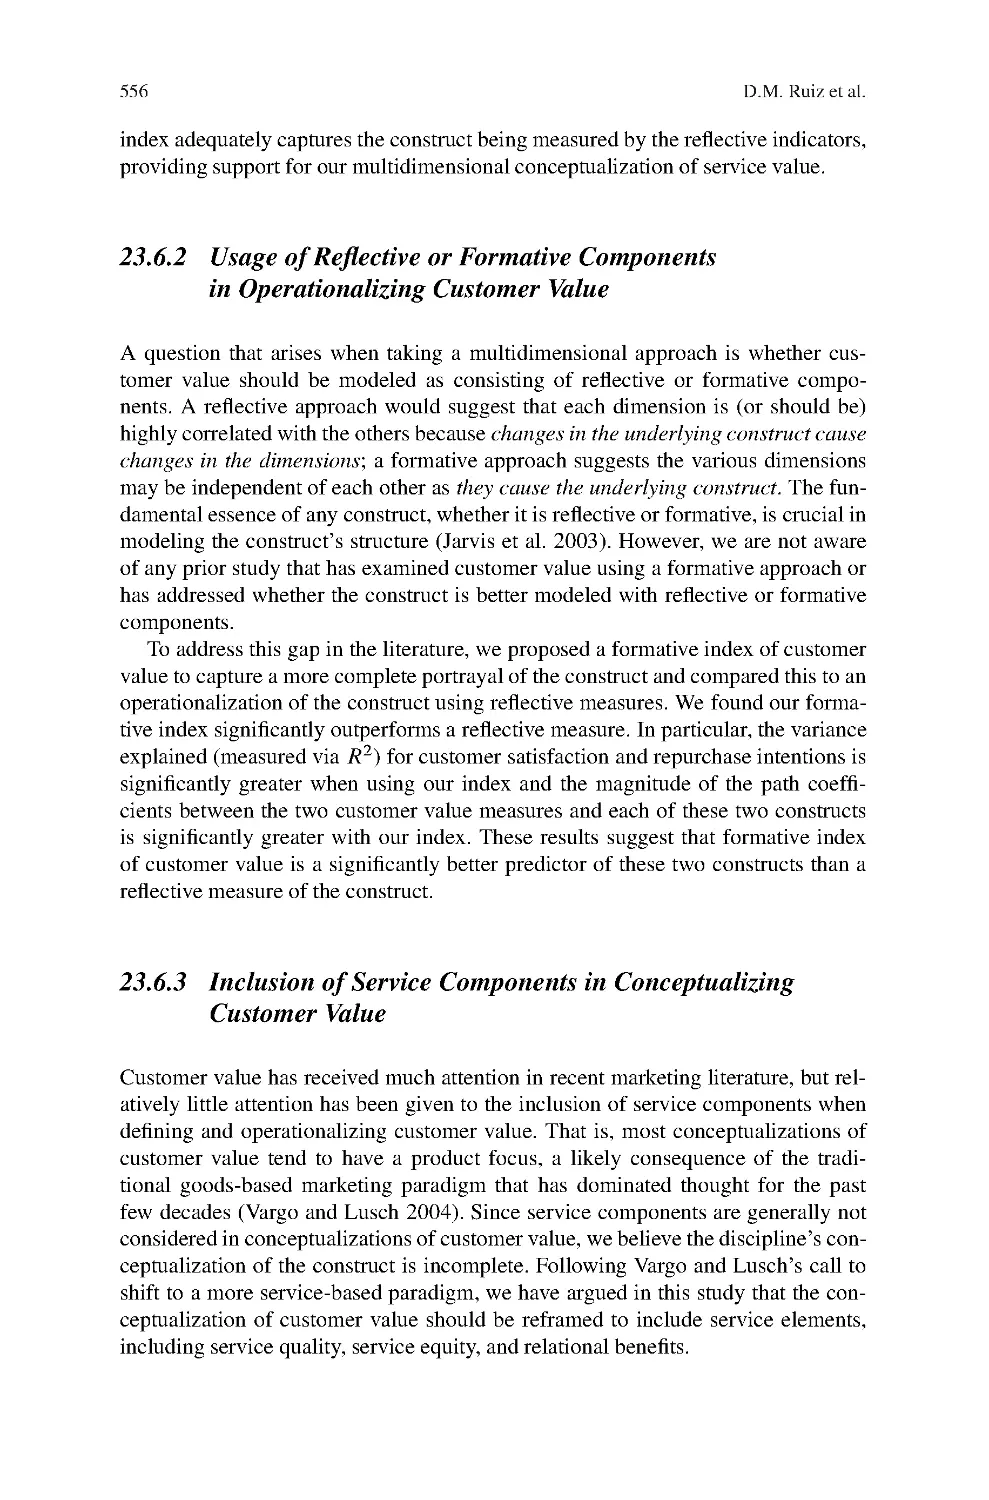 23.6.2 Usage of Reflective or Formative Components in Operationalizing Customer Value
23.6.3 Inclusion of Service Components in Conceptualizing Customer Value